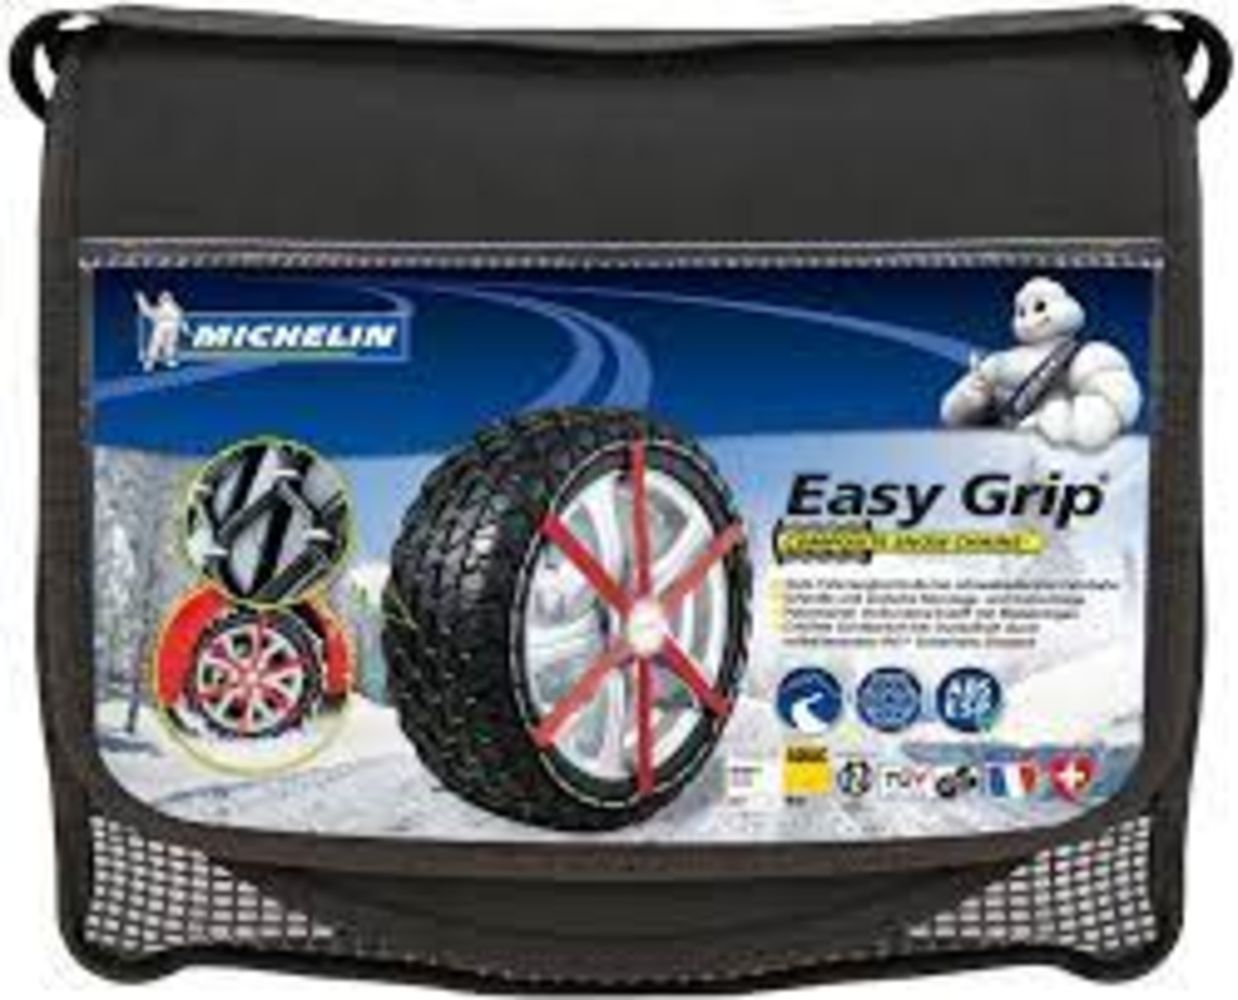 Single & Trade Lots of Michelin Snow Grips & Car Products - New & Packaged - Delivery & Collection Available